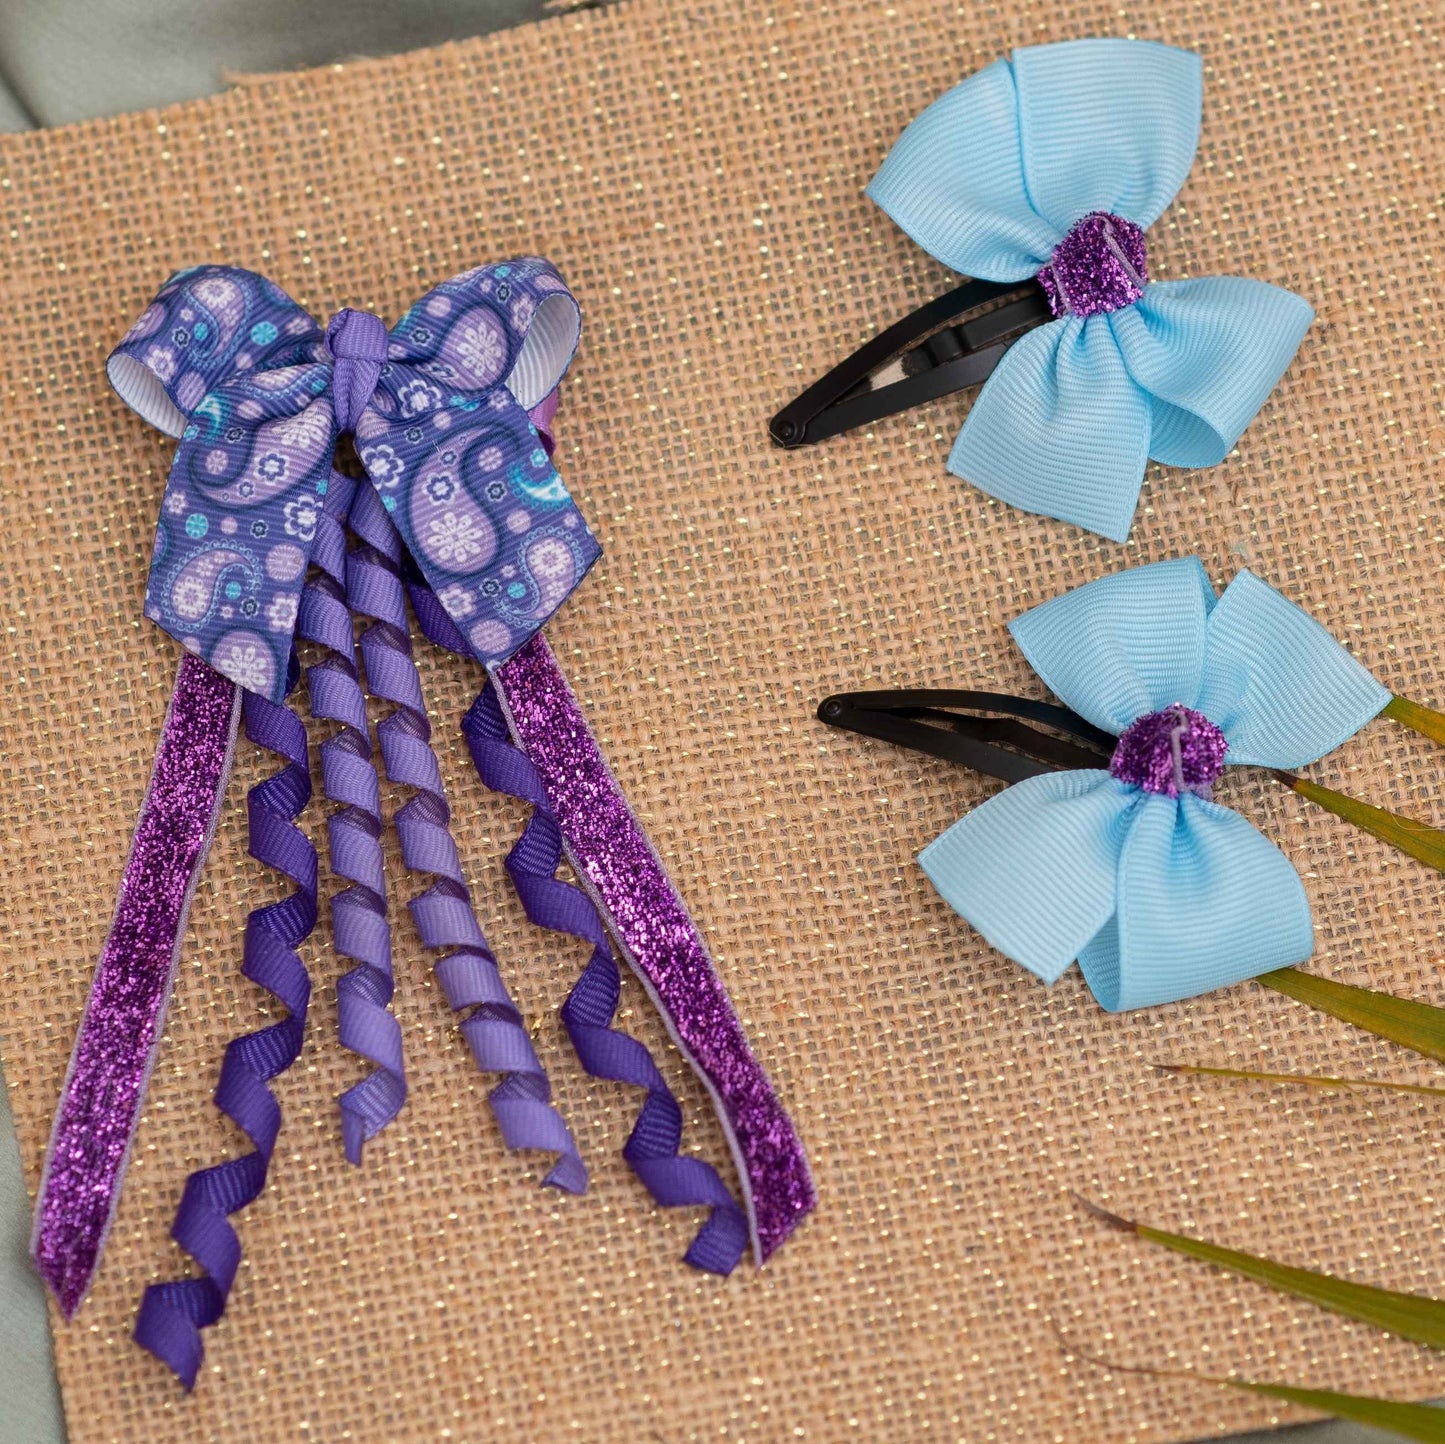 Combo: Cute dangler on alligator clip along with cute and fancy bow on tic-tac pins - Purple and Blue (Set of 1 pairs a, 1 single bow - 3 quantity)